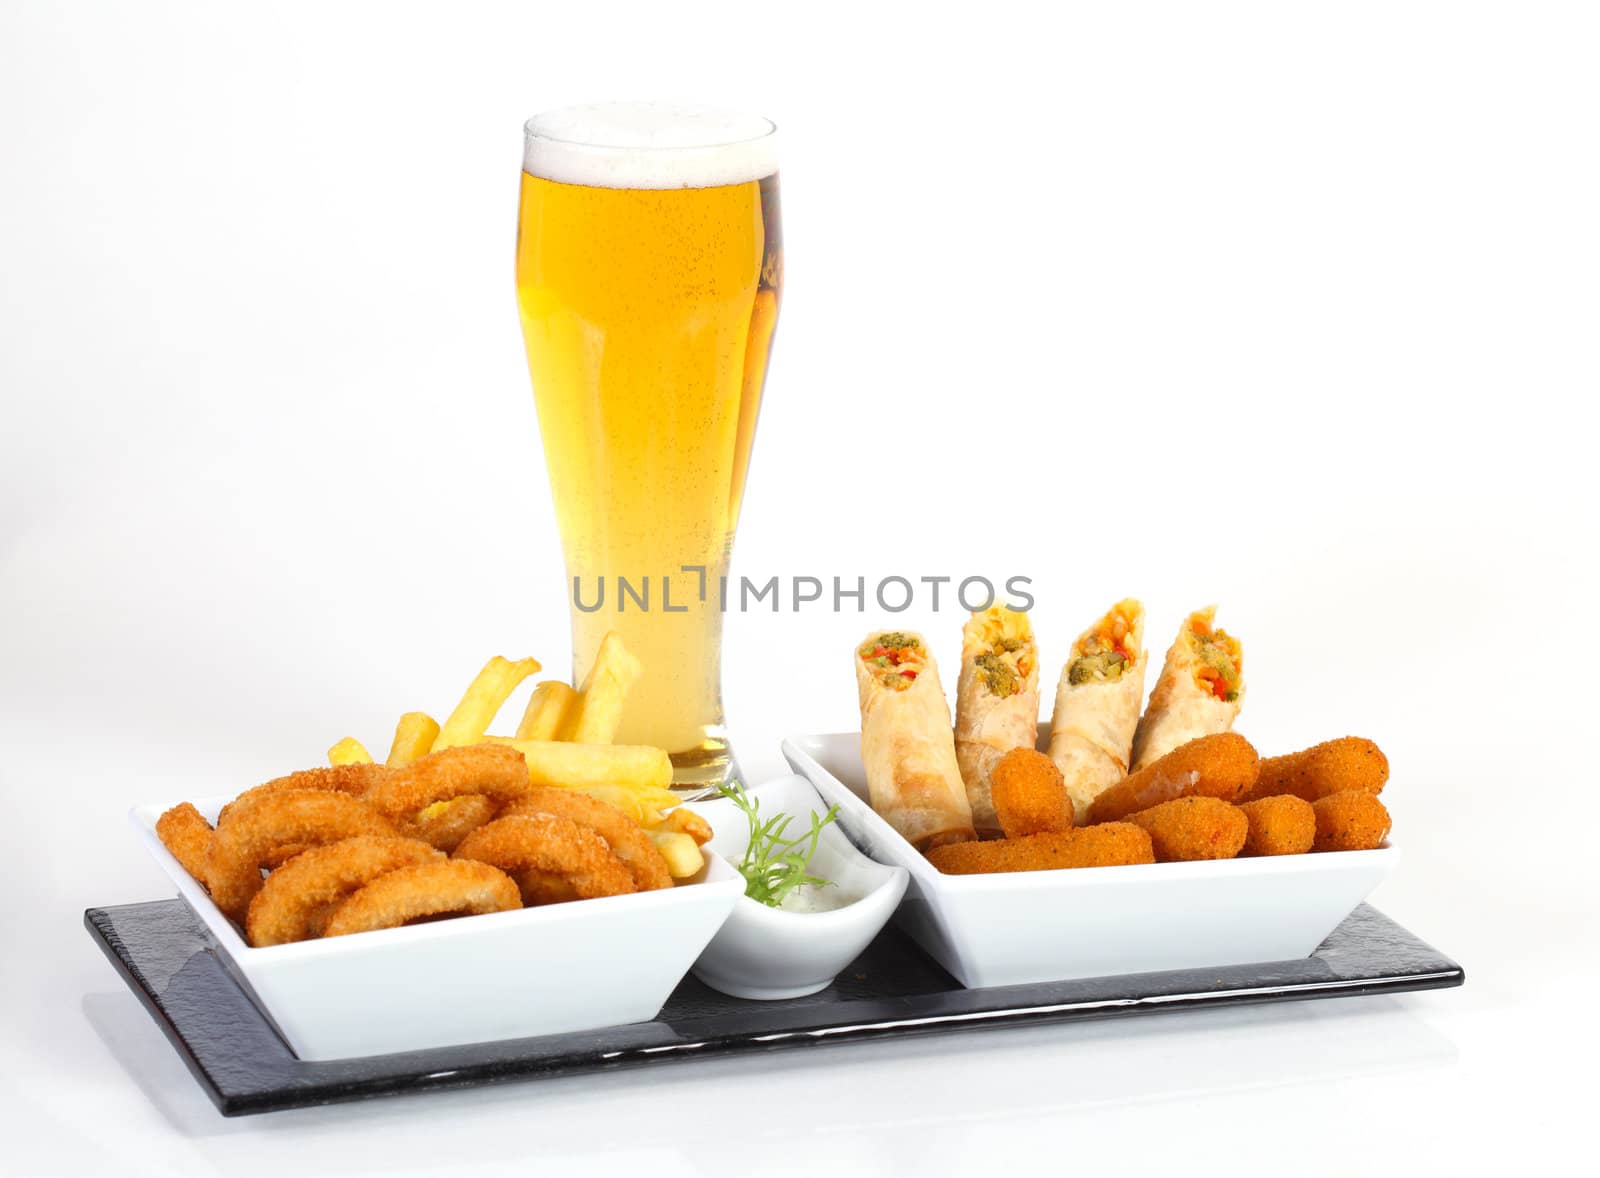 Beer and fried appetizer by shamtor